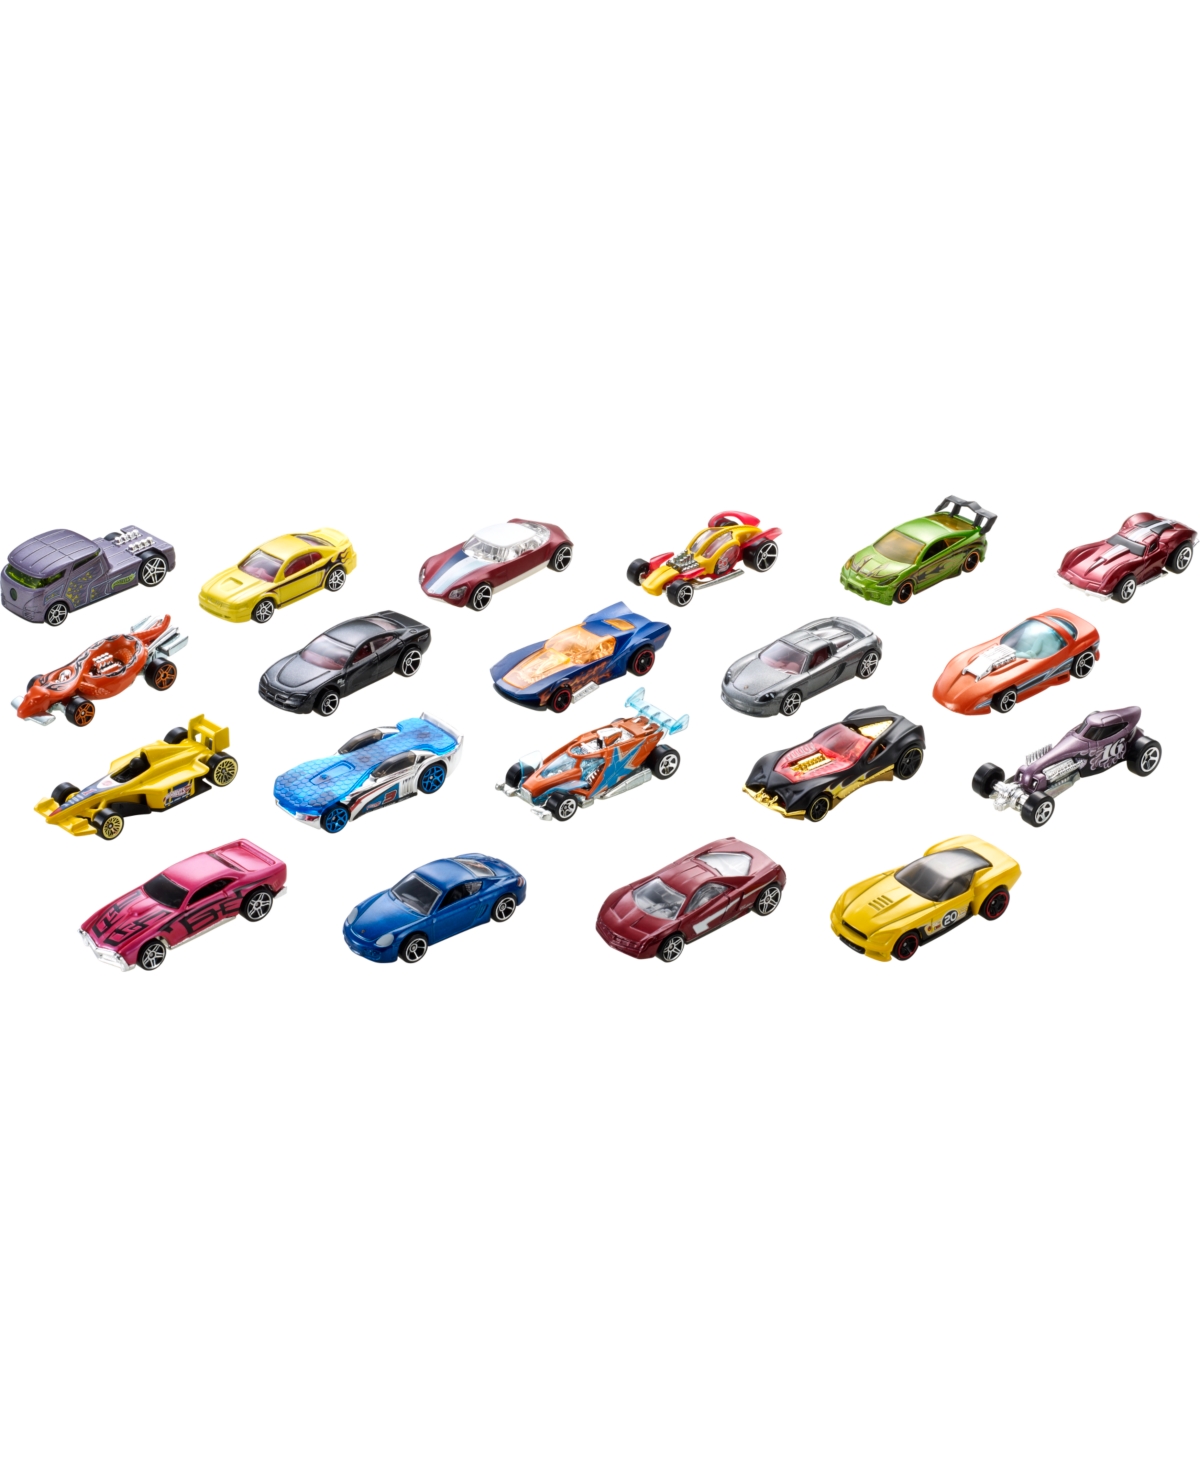 Shop Hot Wheels 20-car Pack, 20 1:64 Scale Toy Vehicles-styles May Vary In Asst Multi